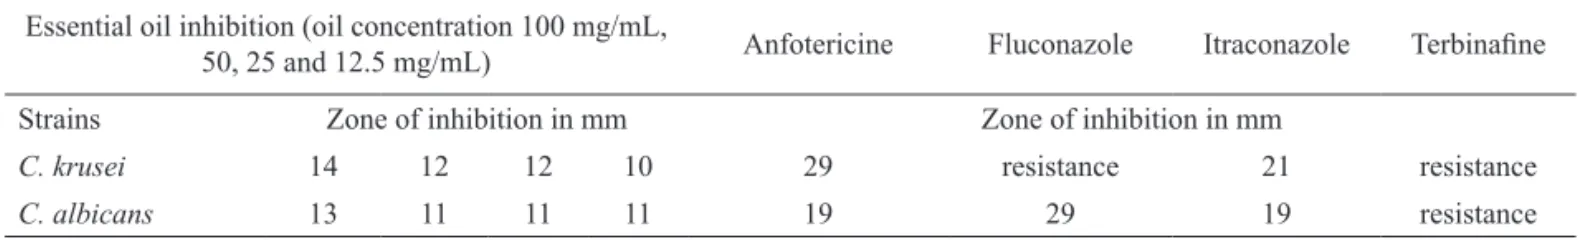 Table 2. Antifungal activity of essential oil from leaves of L. camara in comparison with some antifungal antibiotics.